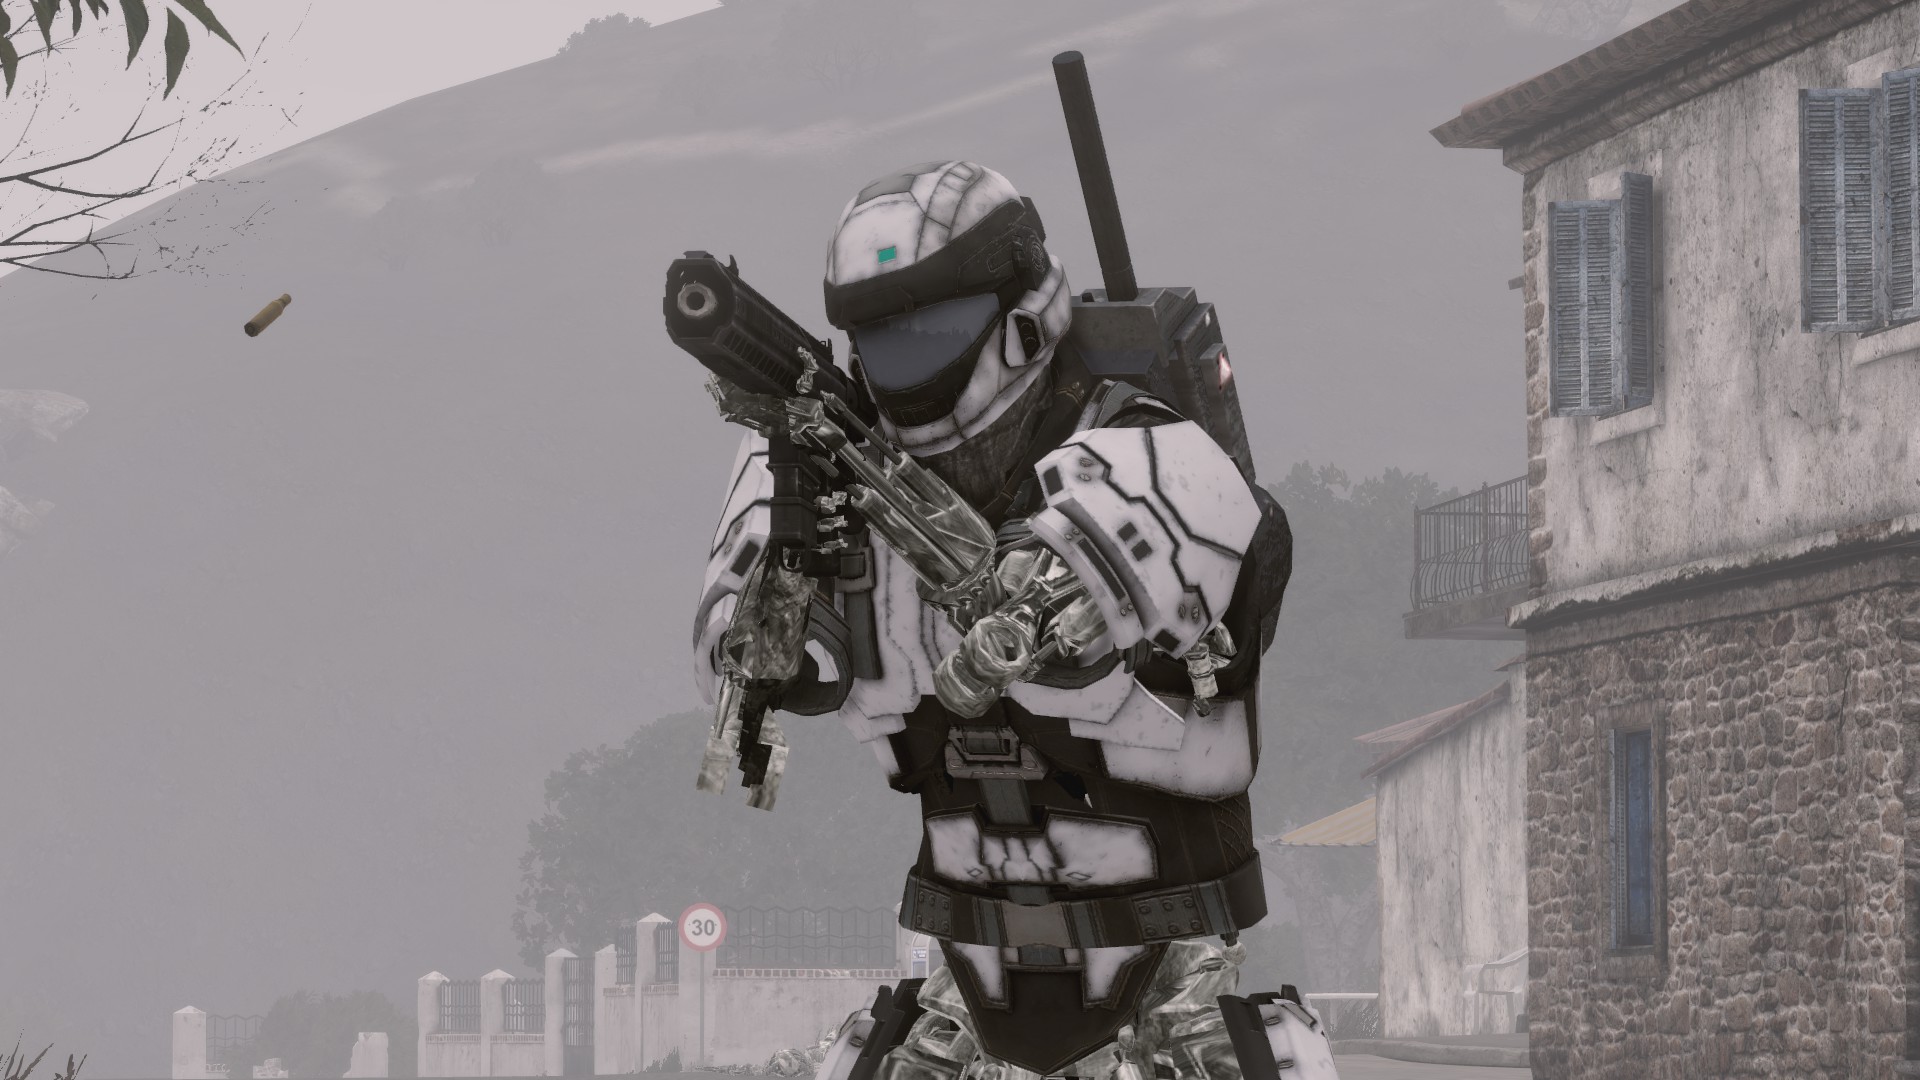 Arma 3 Wallpaper - Red and white sniper by CaptainAweesome on